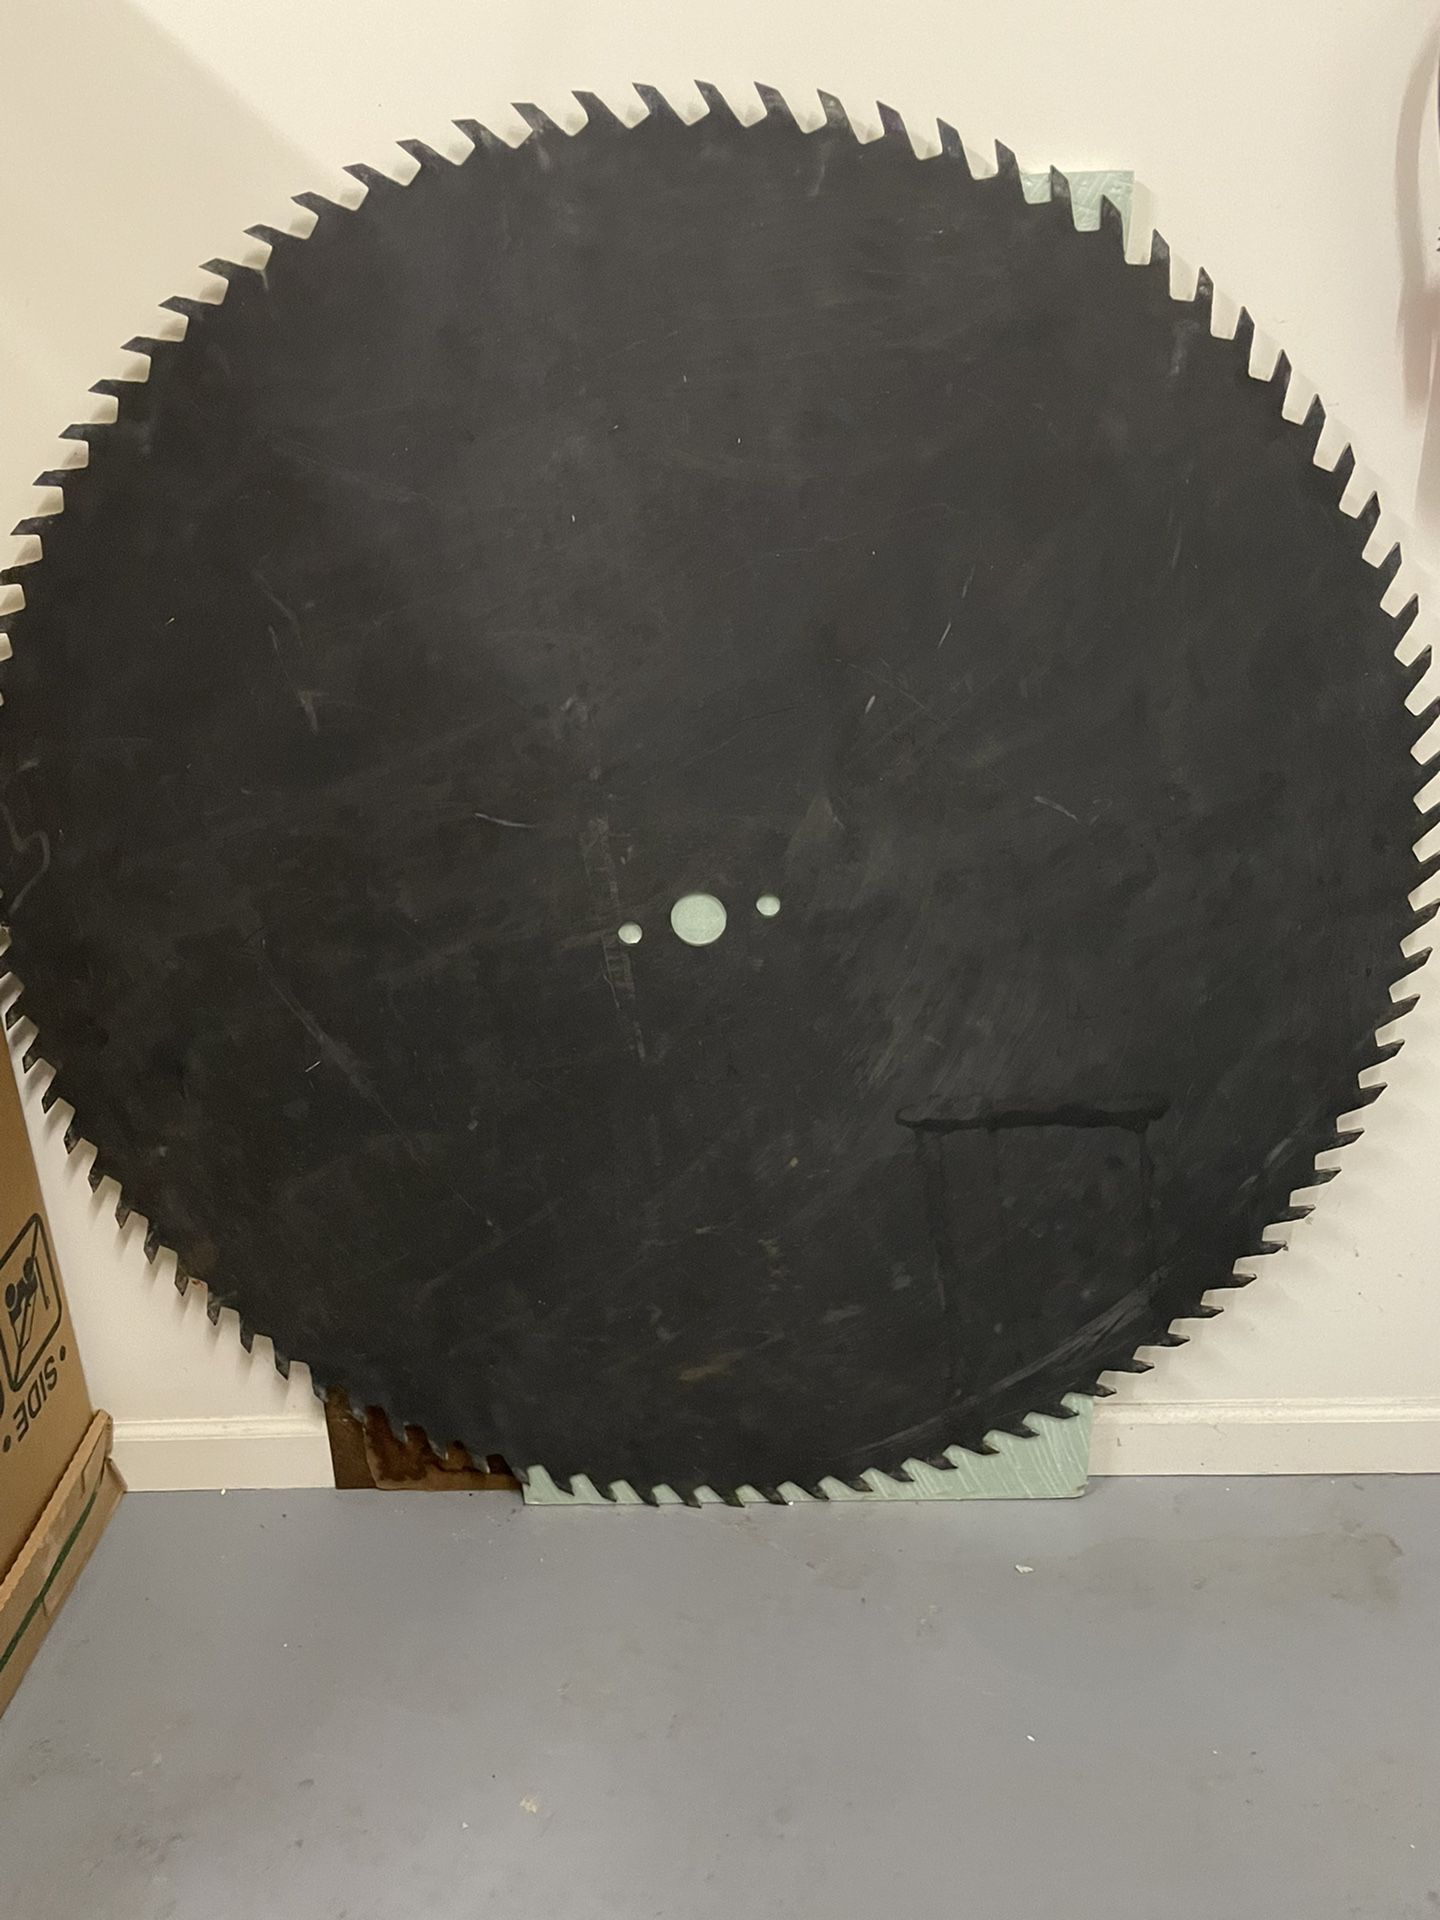 52” Steel Saw Blade for Art Project